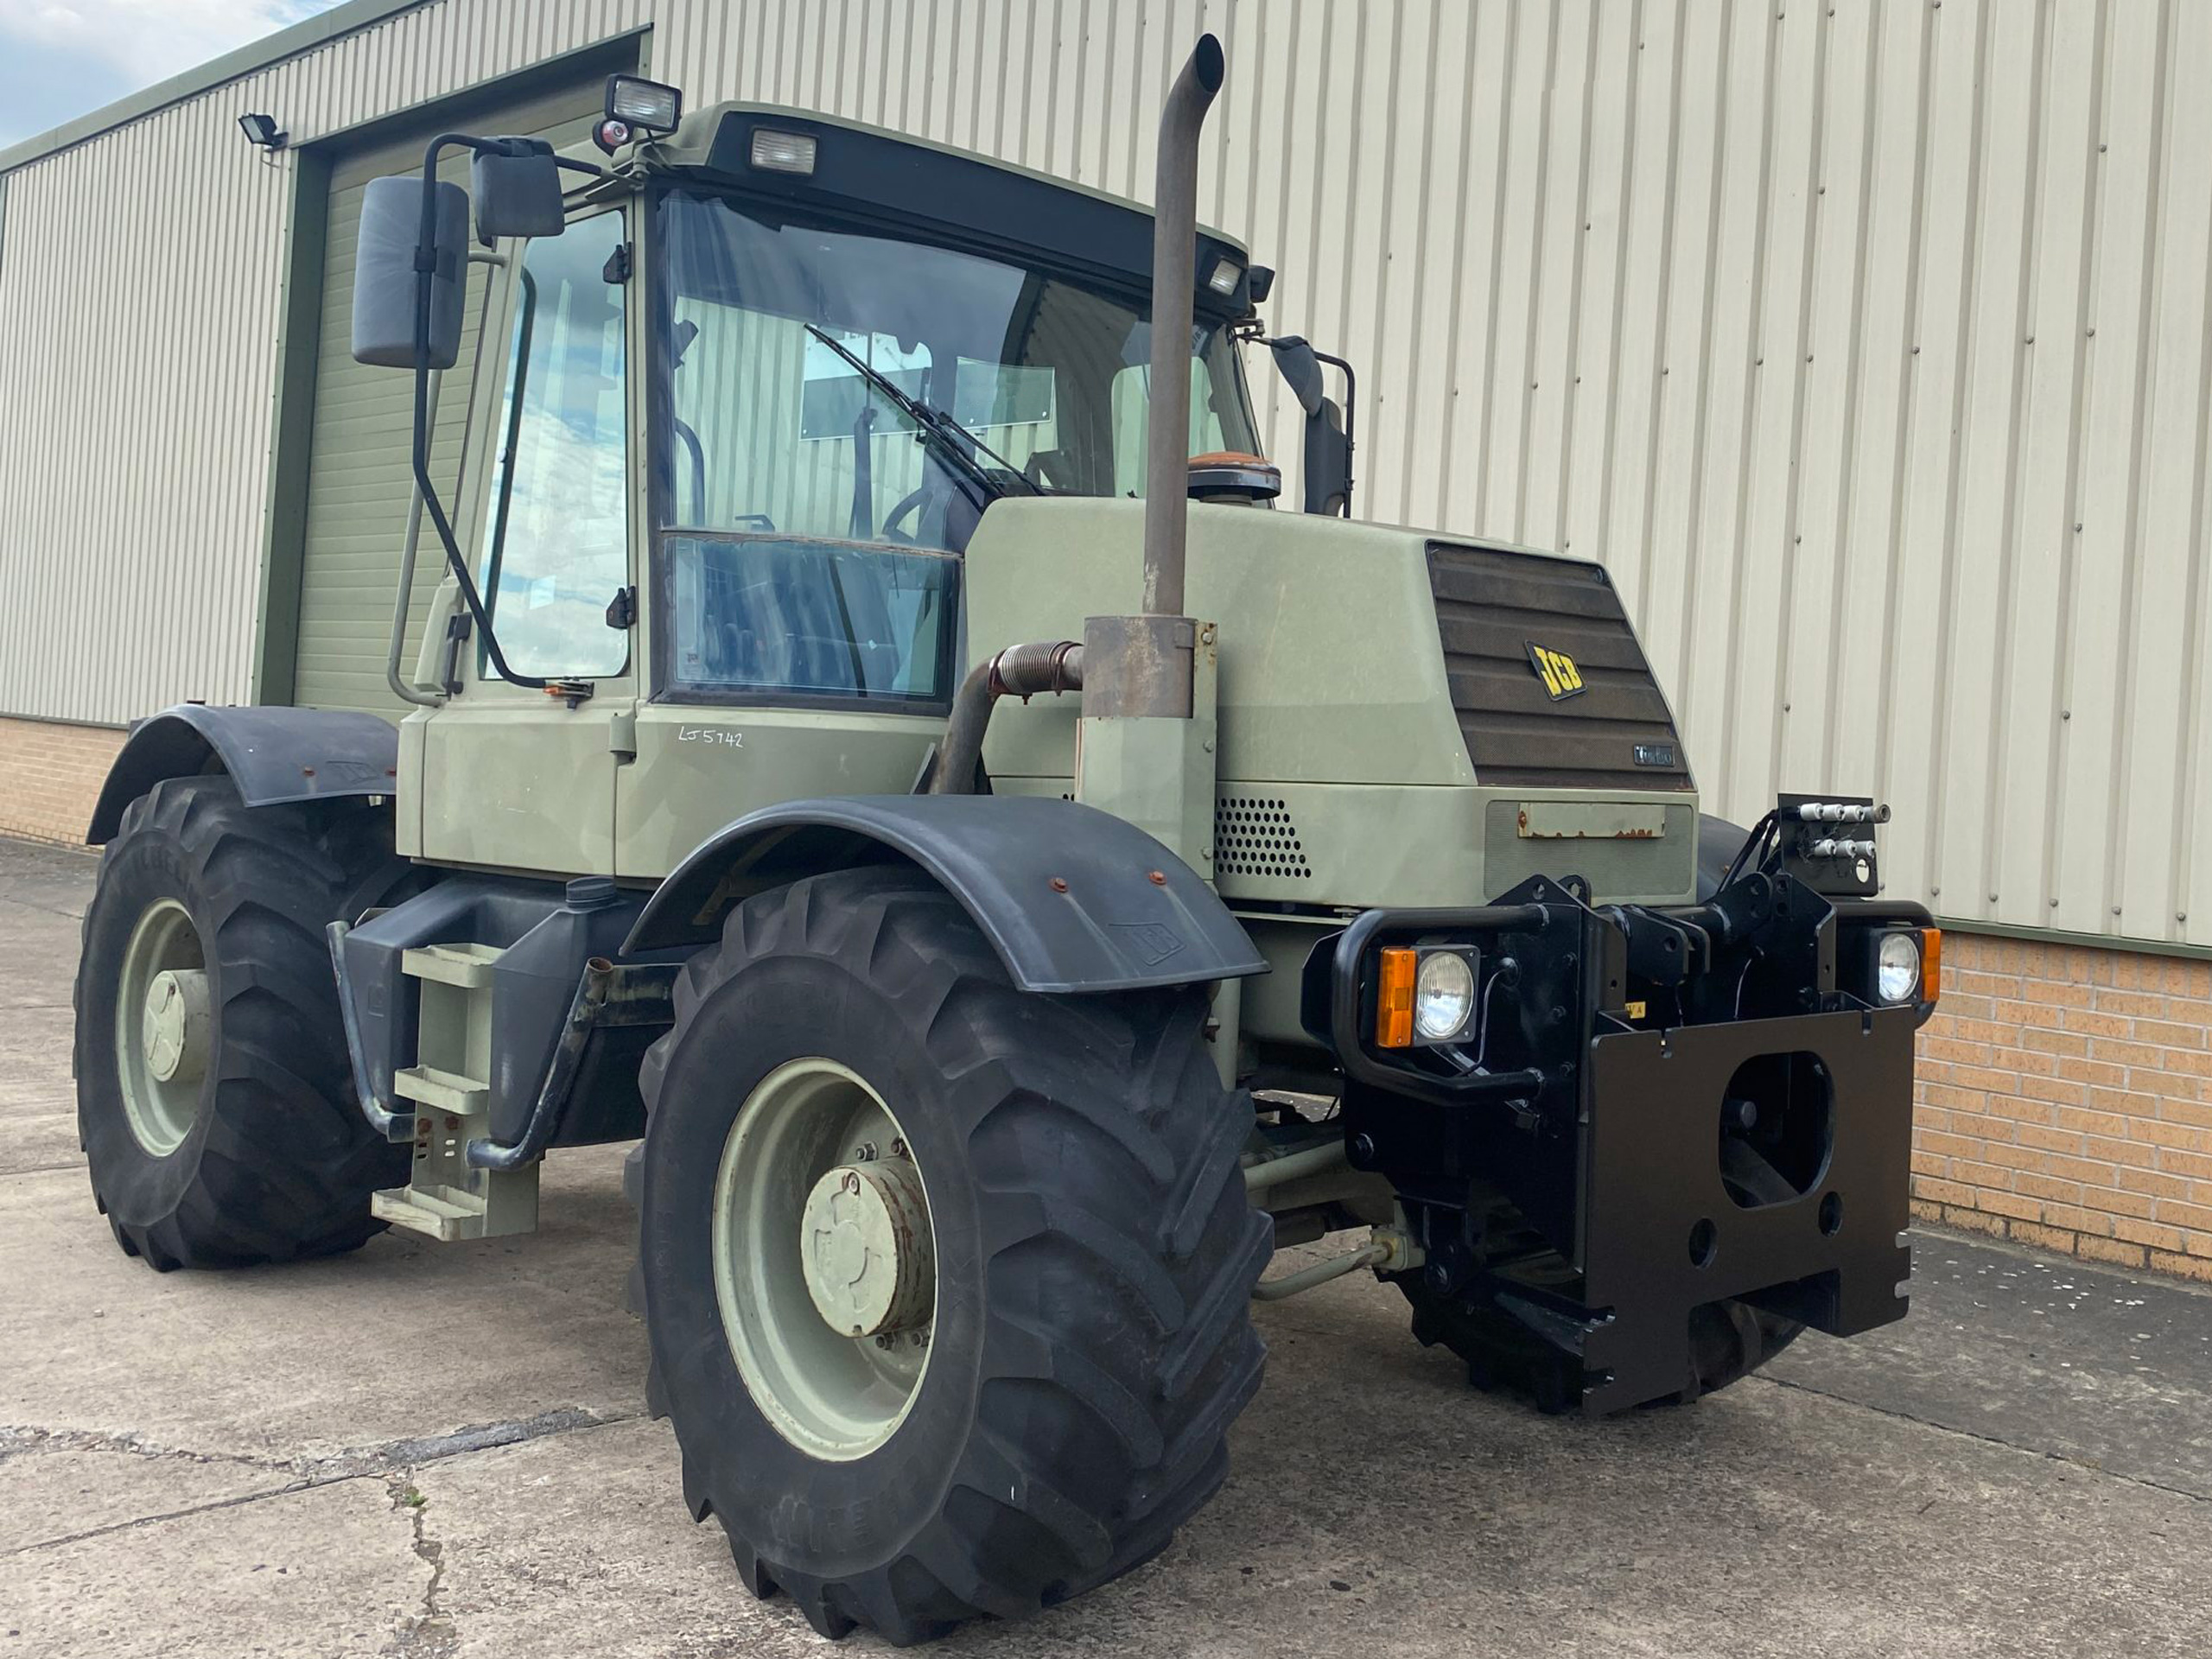 JCB fastrac 150T 80 ex MoD - Govsales of mod surplus ex army trucks, ex army land rovers and other military vehicles for sale